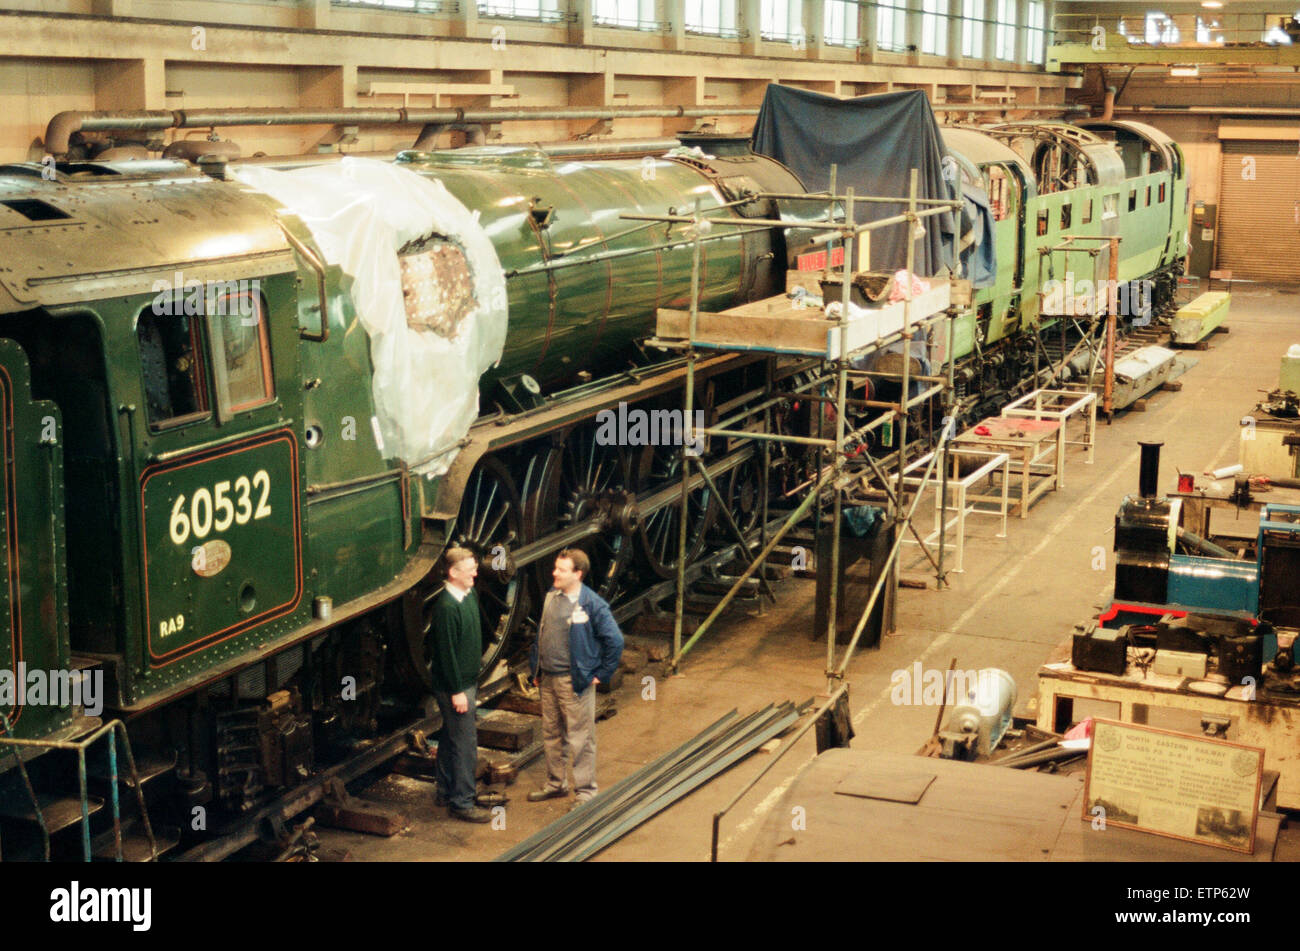 ICI Train Preservation, 4th January 1994. Dave Pearson (left) and Terry Bye, with the Blue Peter, an A2 No. 60532 Locomotive designed by Arthur H Peppercorn of the LNER, and Deltic, The Napier Deltic valveless, two-stroke Diesel engine. Stock Photo